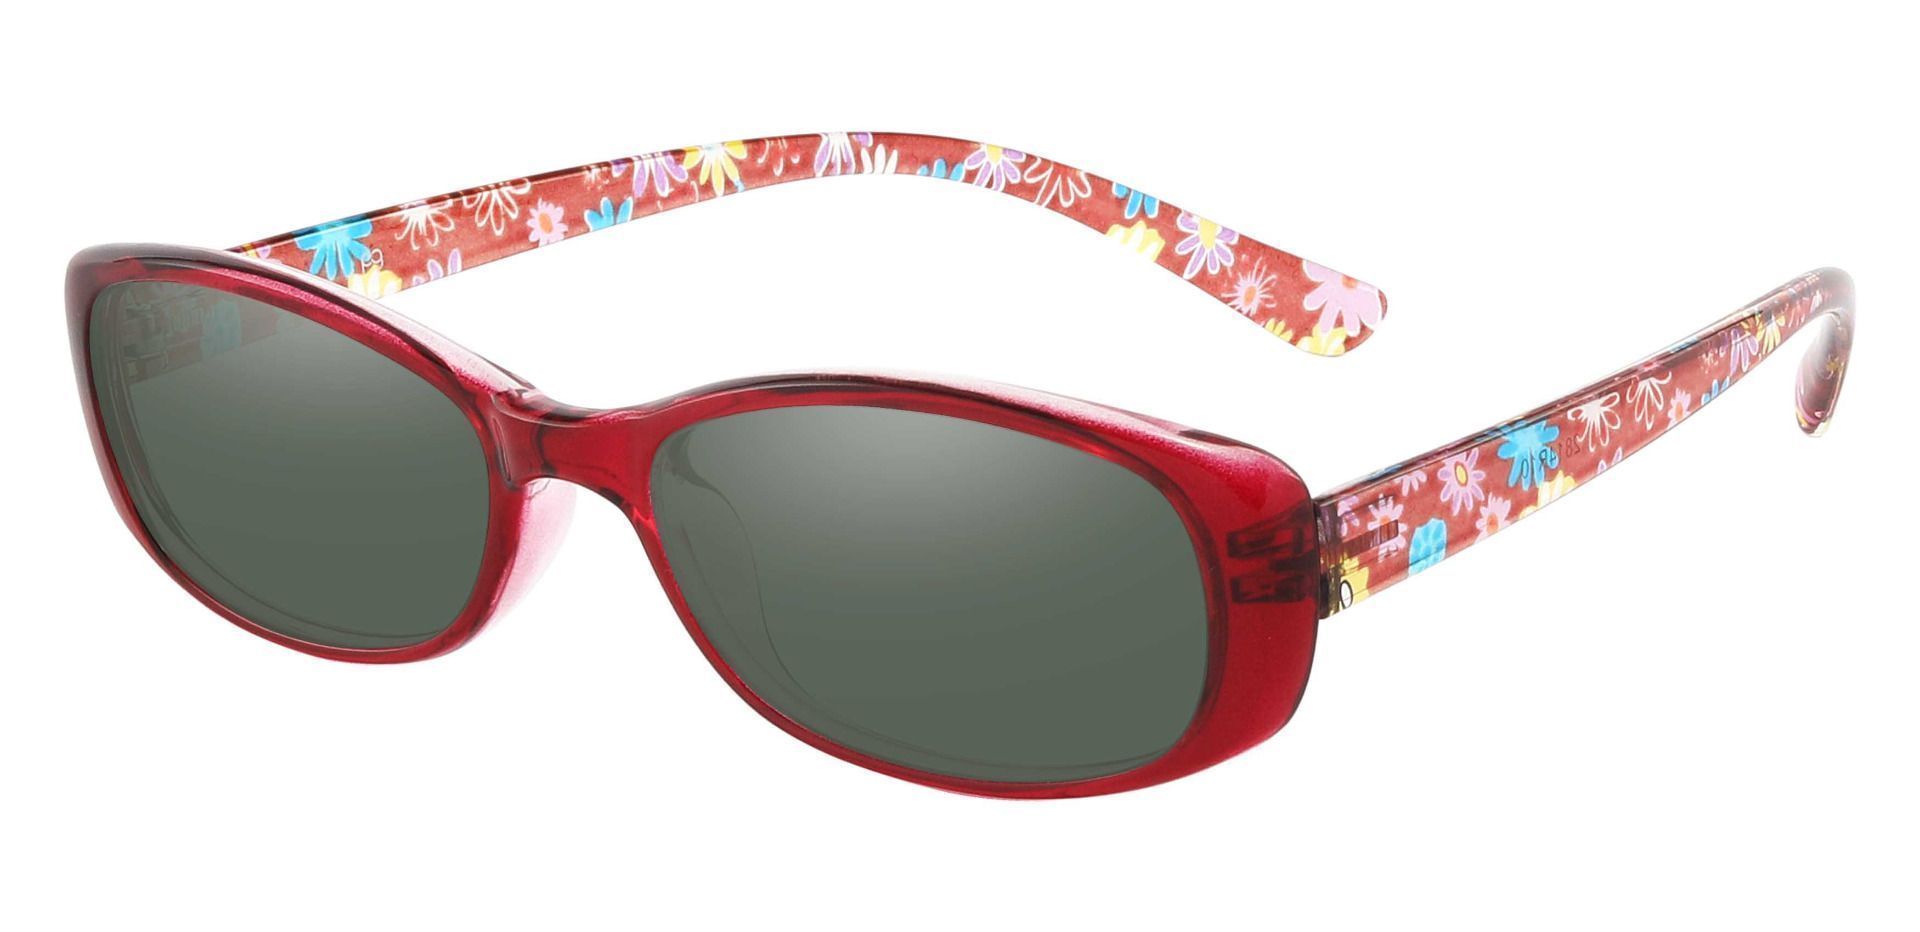 Bethesda Rectangle Reading Sunglasses - Red Frame With Green Lenses